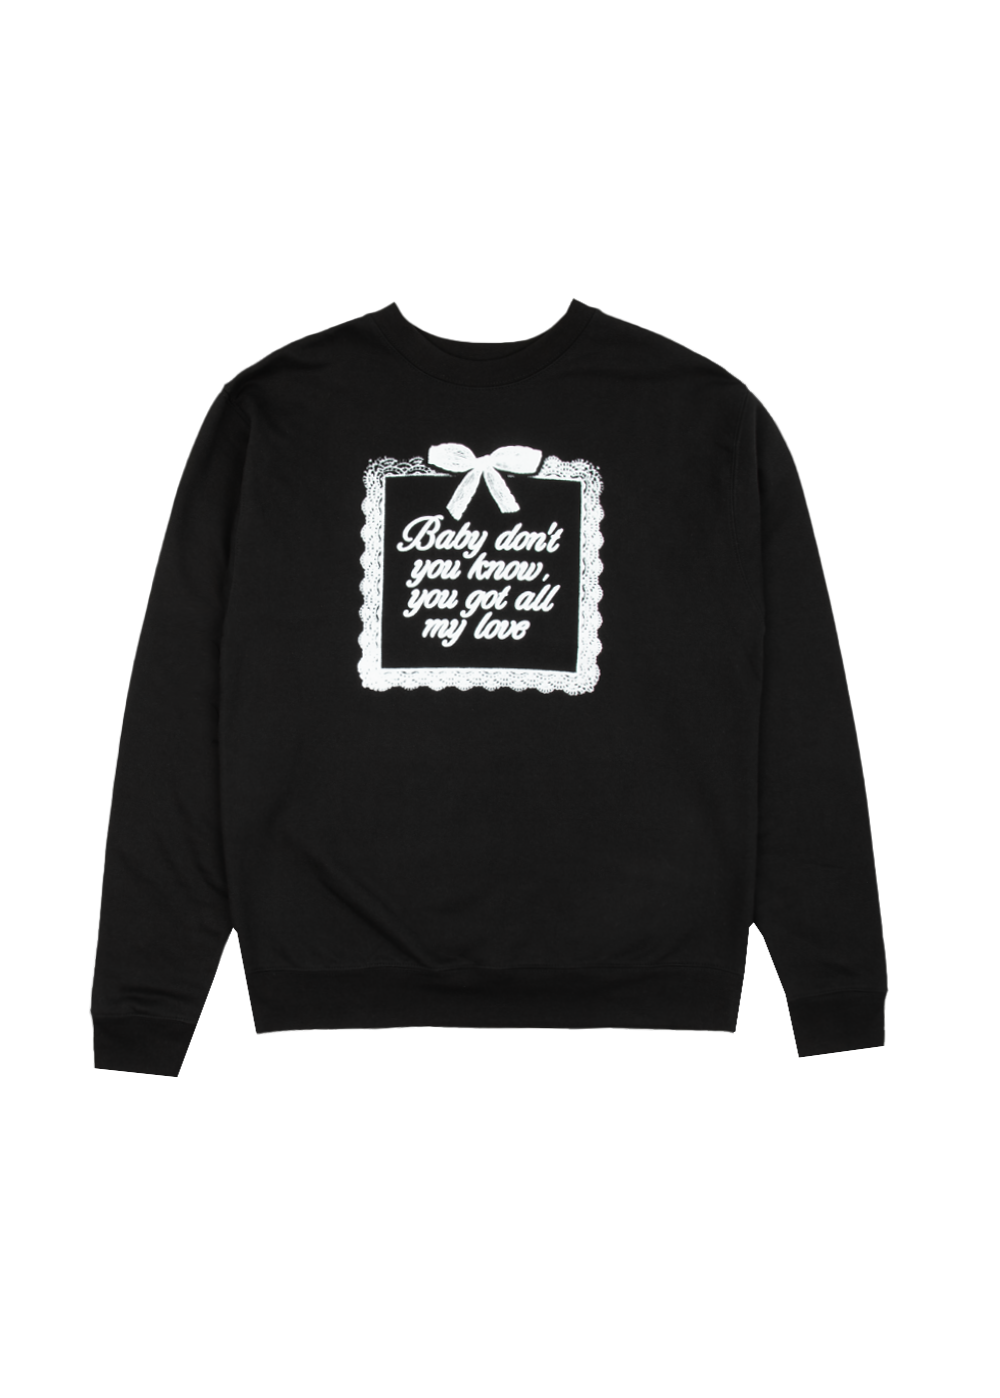 yours truly 10th anniversary all my love crewneck – Ariana Grande